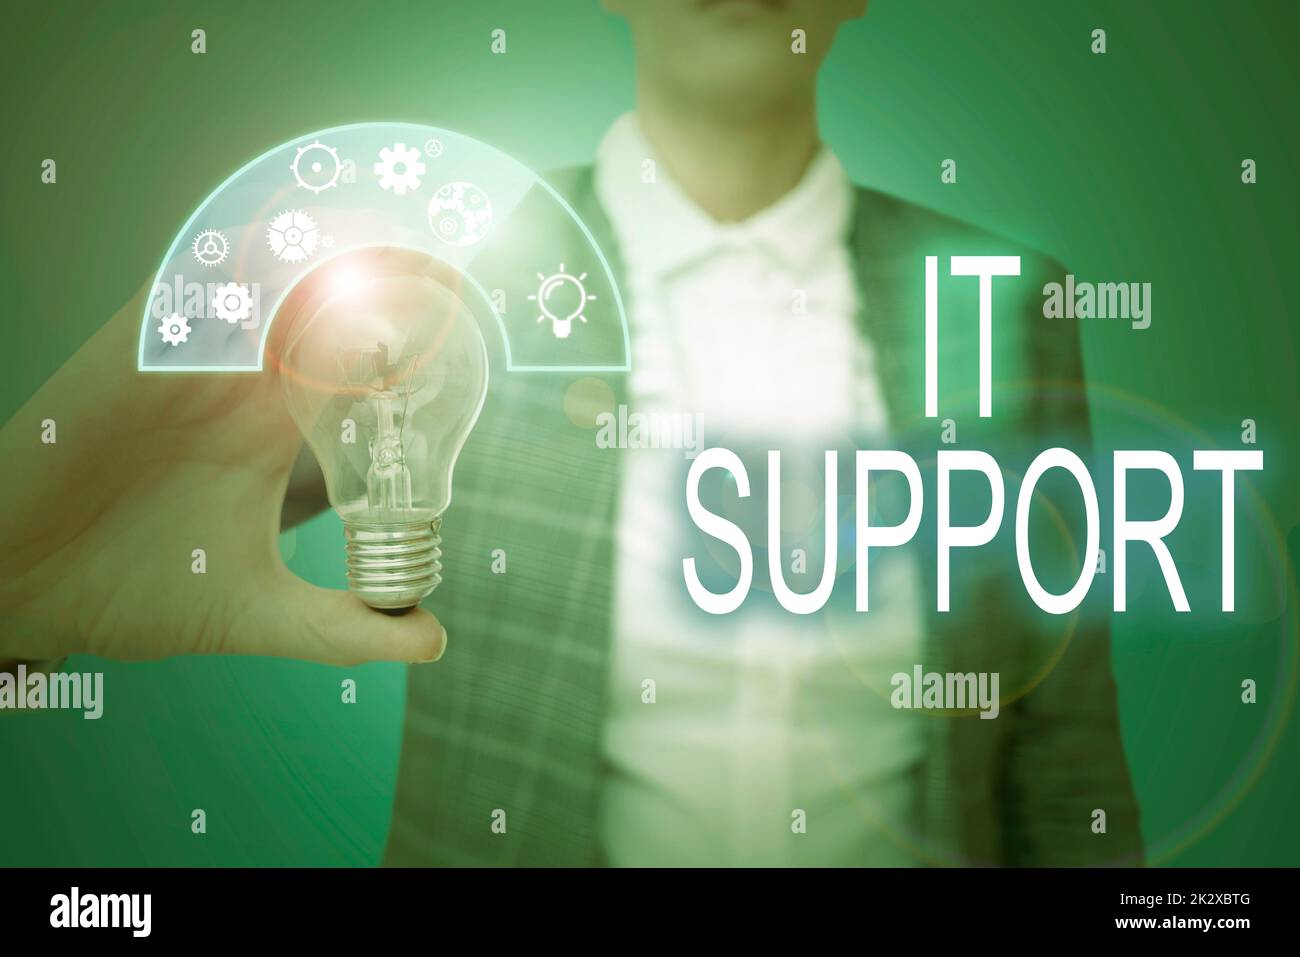 Writing displaying text It Support. Business concept Lending help about information technologies and relative issues Lady in suit holding light bulb representing innovative thinking. Stock Photo